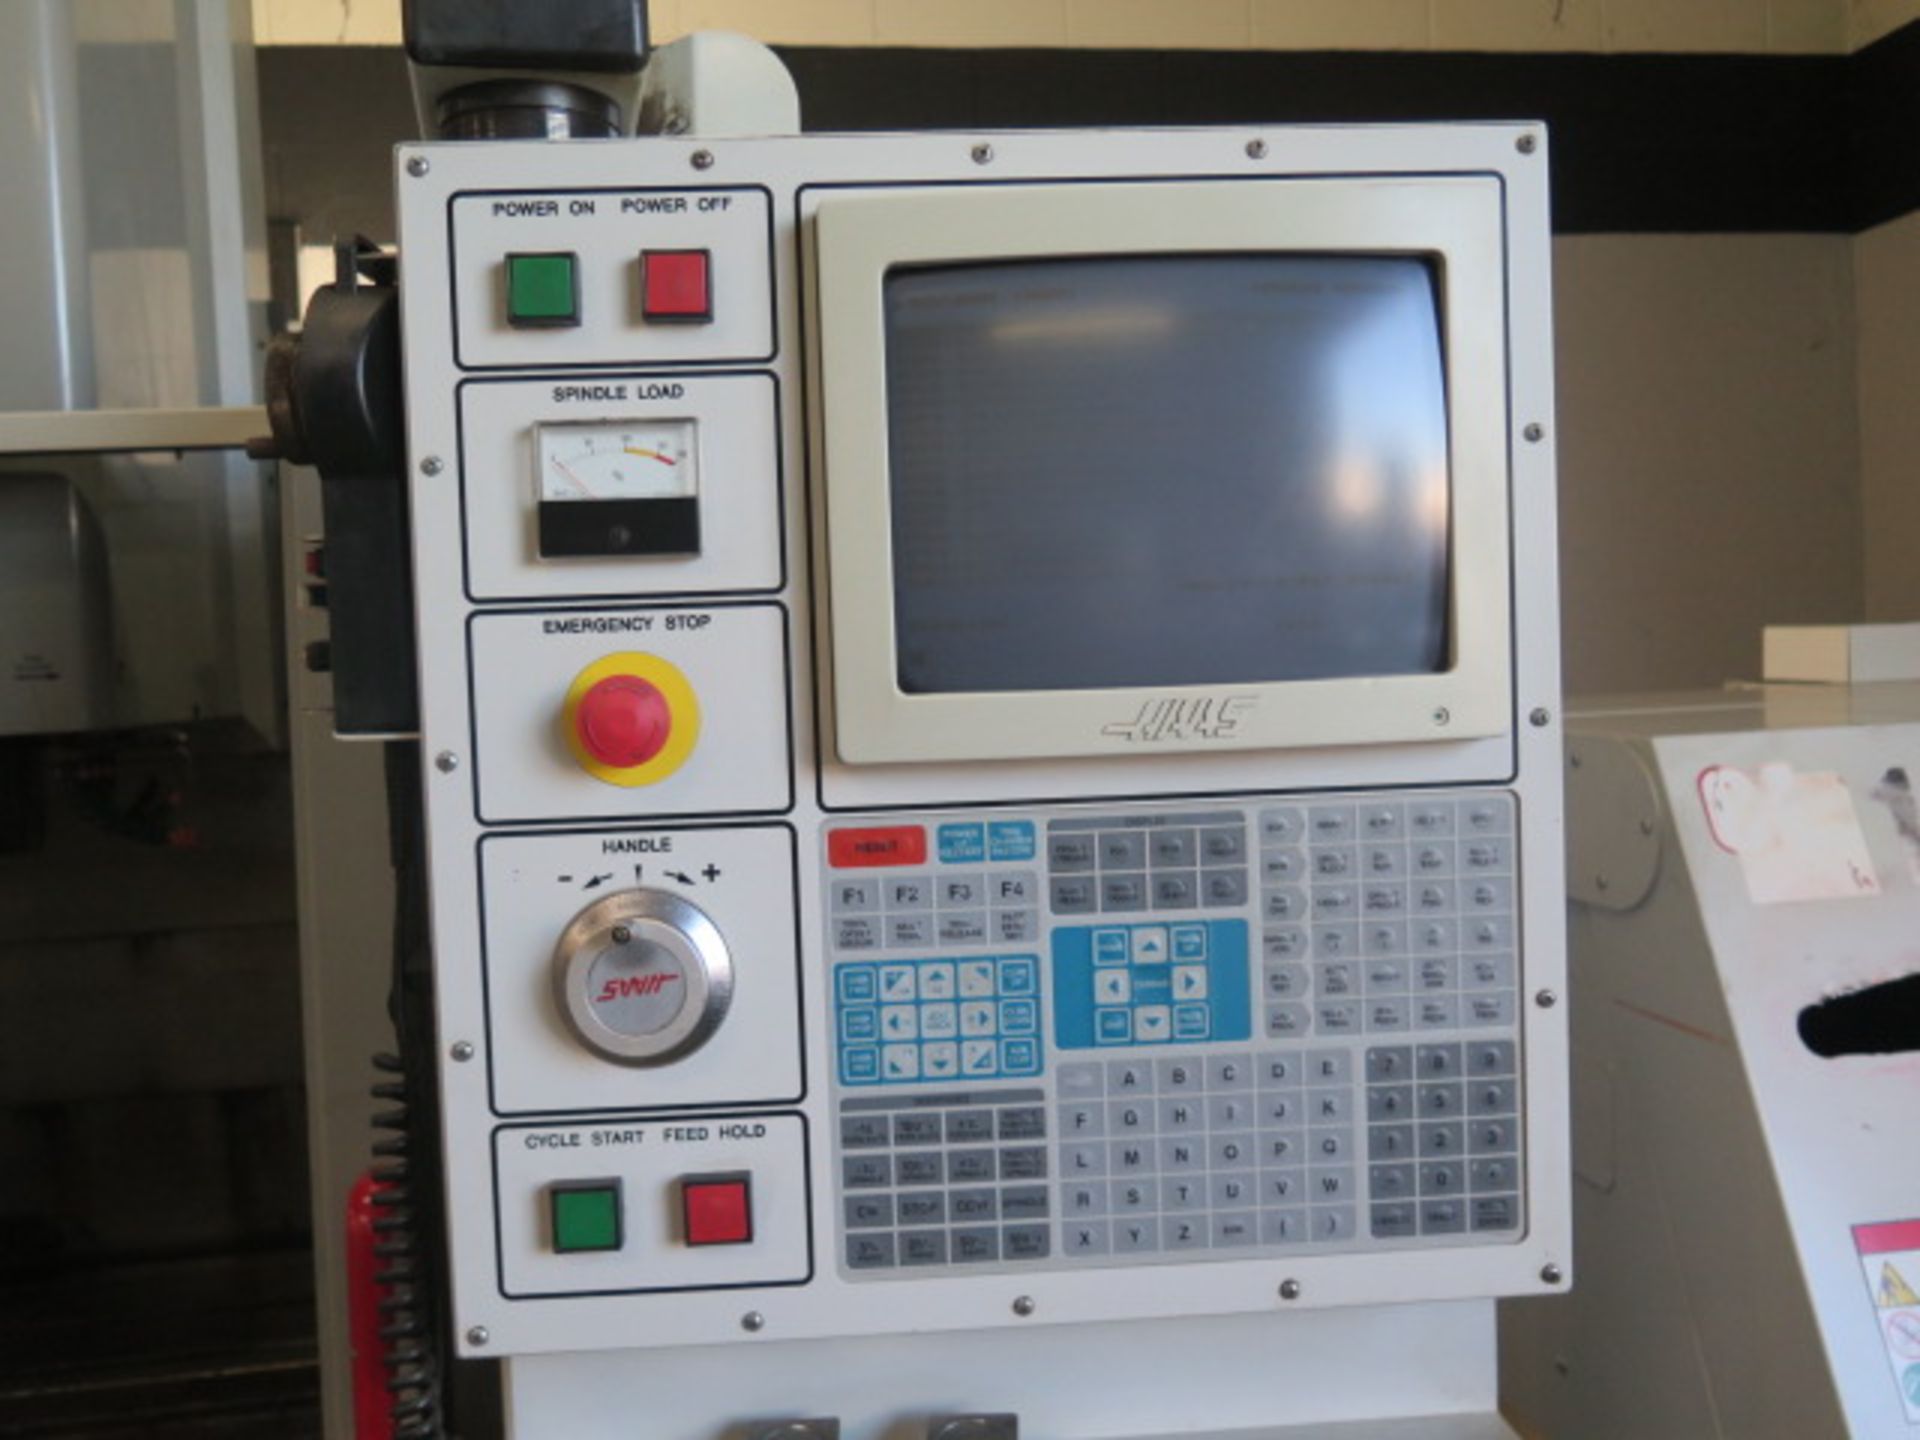 1991 Haas VF-0 4-Axis CNC VMC s/n 14019 w/ Haas Controls, Hand Wheel, 20 ATE, SOLD AS IS - Image 10 of 14